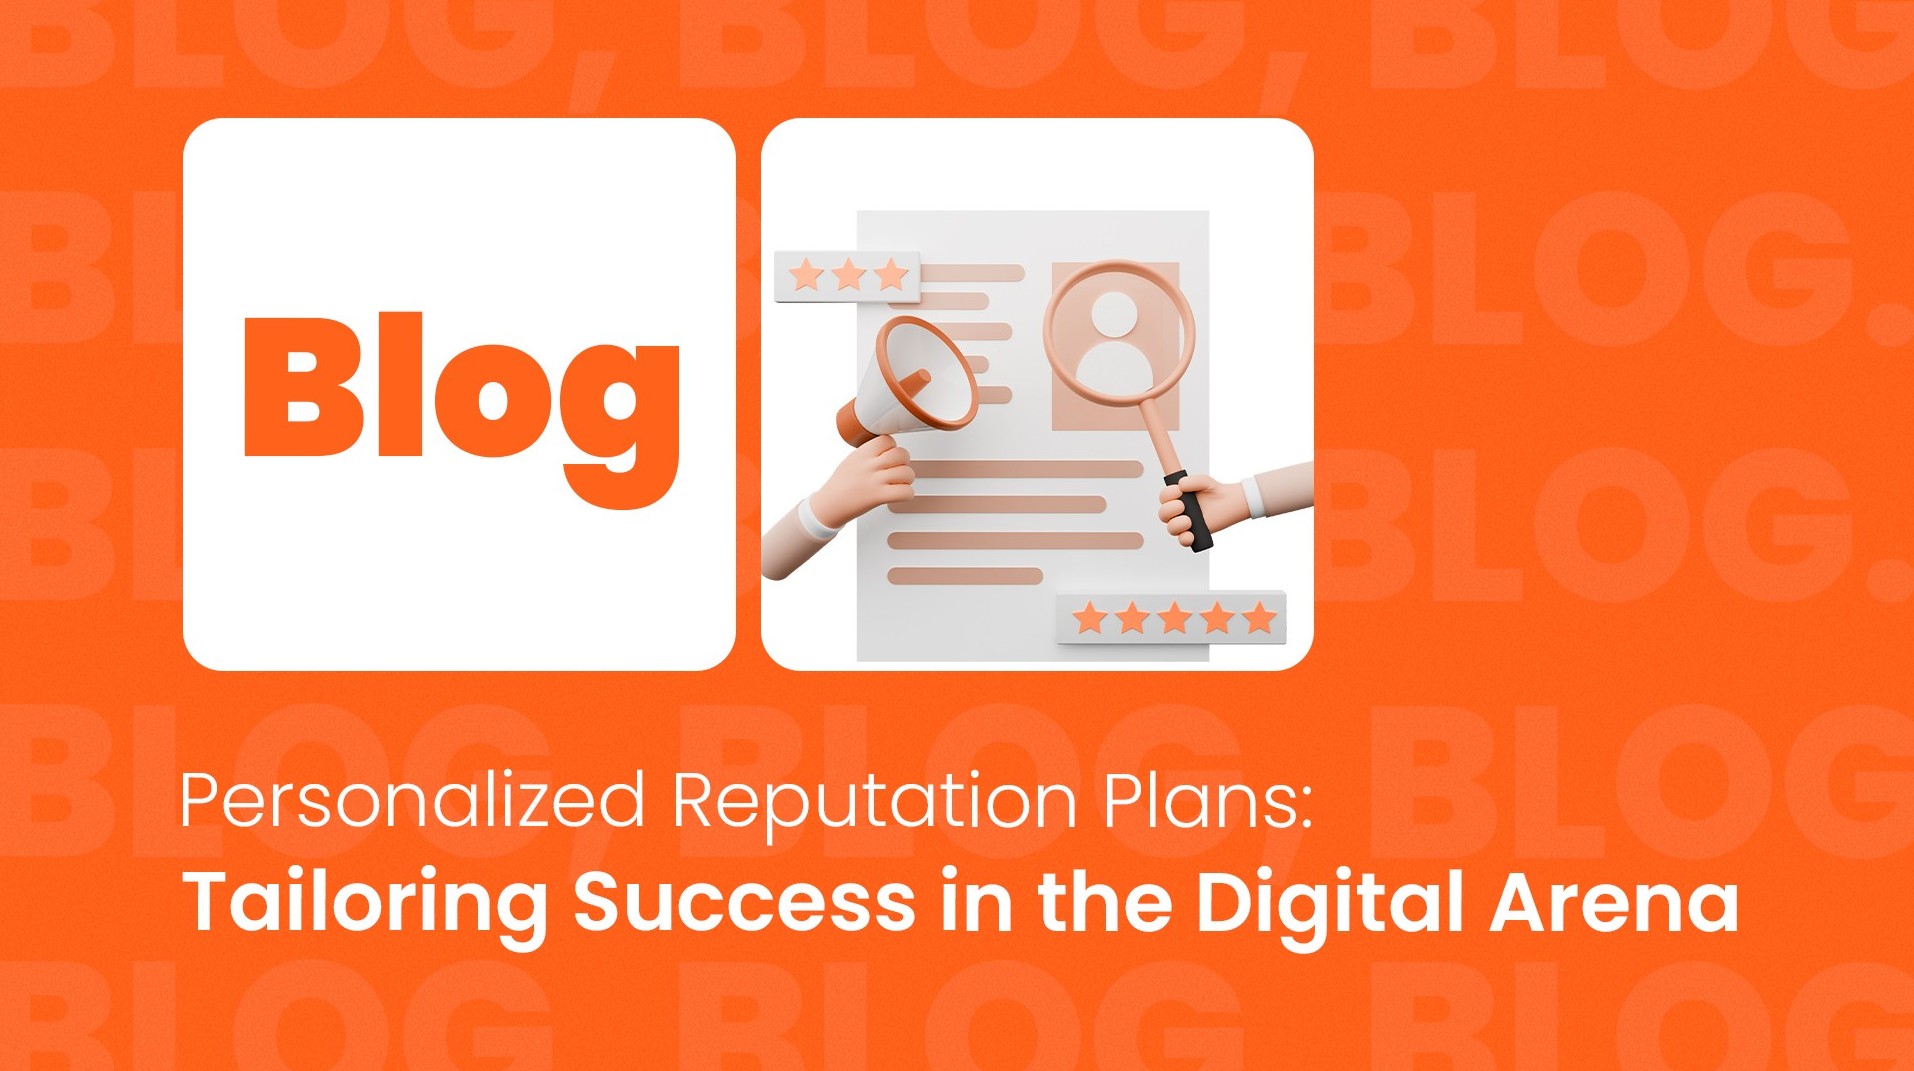 Personalized Reputation Plans: Tailoring Success in the Digital Arena